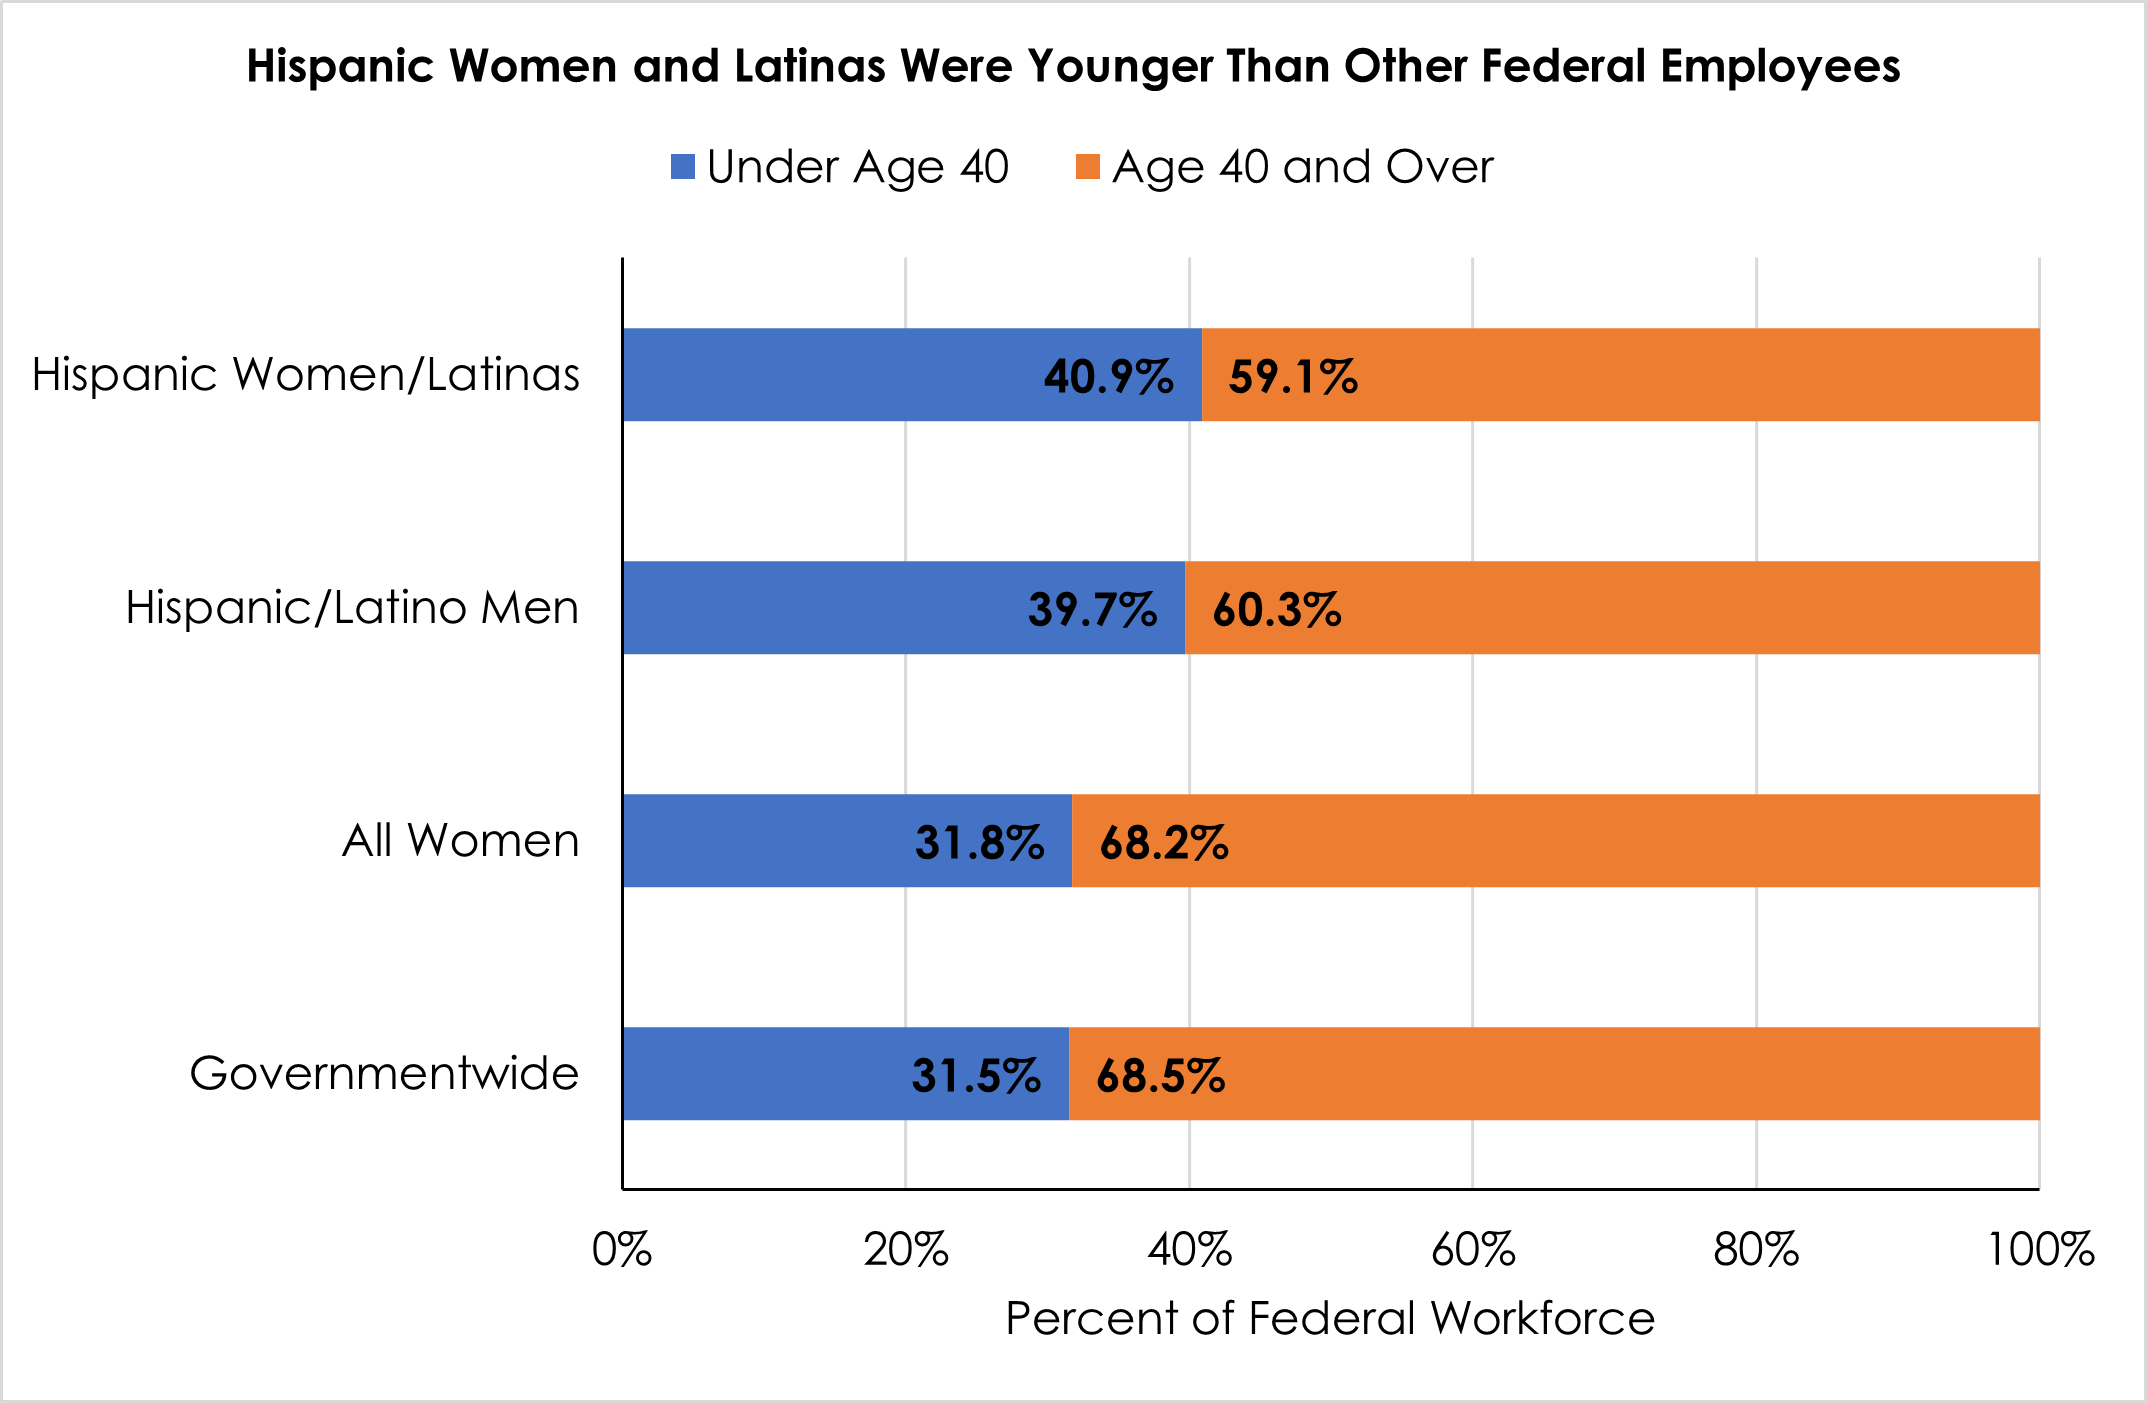 Figure 2 shows that Hispanic and Latina women were younger than other Federal employees in fiscal year 2020.  59.1% Hispanic/Latina Women age 40 and over in Federal Workforce.  40.9% Hispanic/Latina Women under age 40 in Federal Workforce.  60.3% Hispanic/Latino Men age 40 and over in Federal Workforce.  39.7% Hispanic/Latino Men under age 40 in Federal Workforce.  68.2% Women age 40 and over in Federal Workforce.  31.8% Women under age 40 in Federal Workforce.  68.2% federal employees age 40.  31.5% federal employees under age 40.